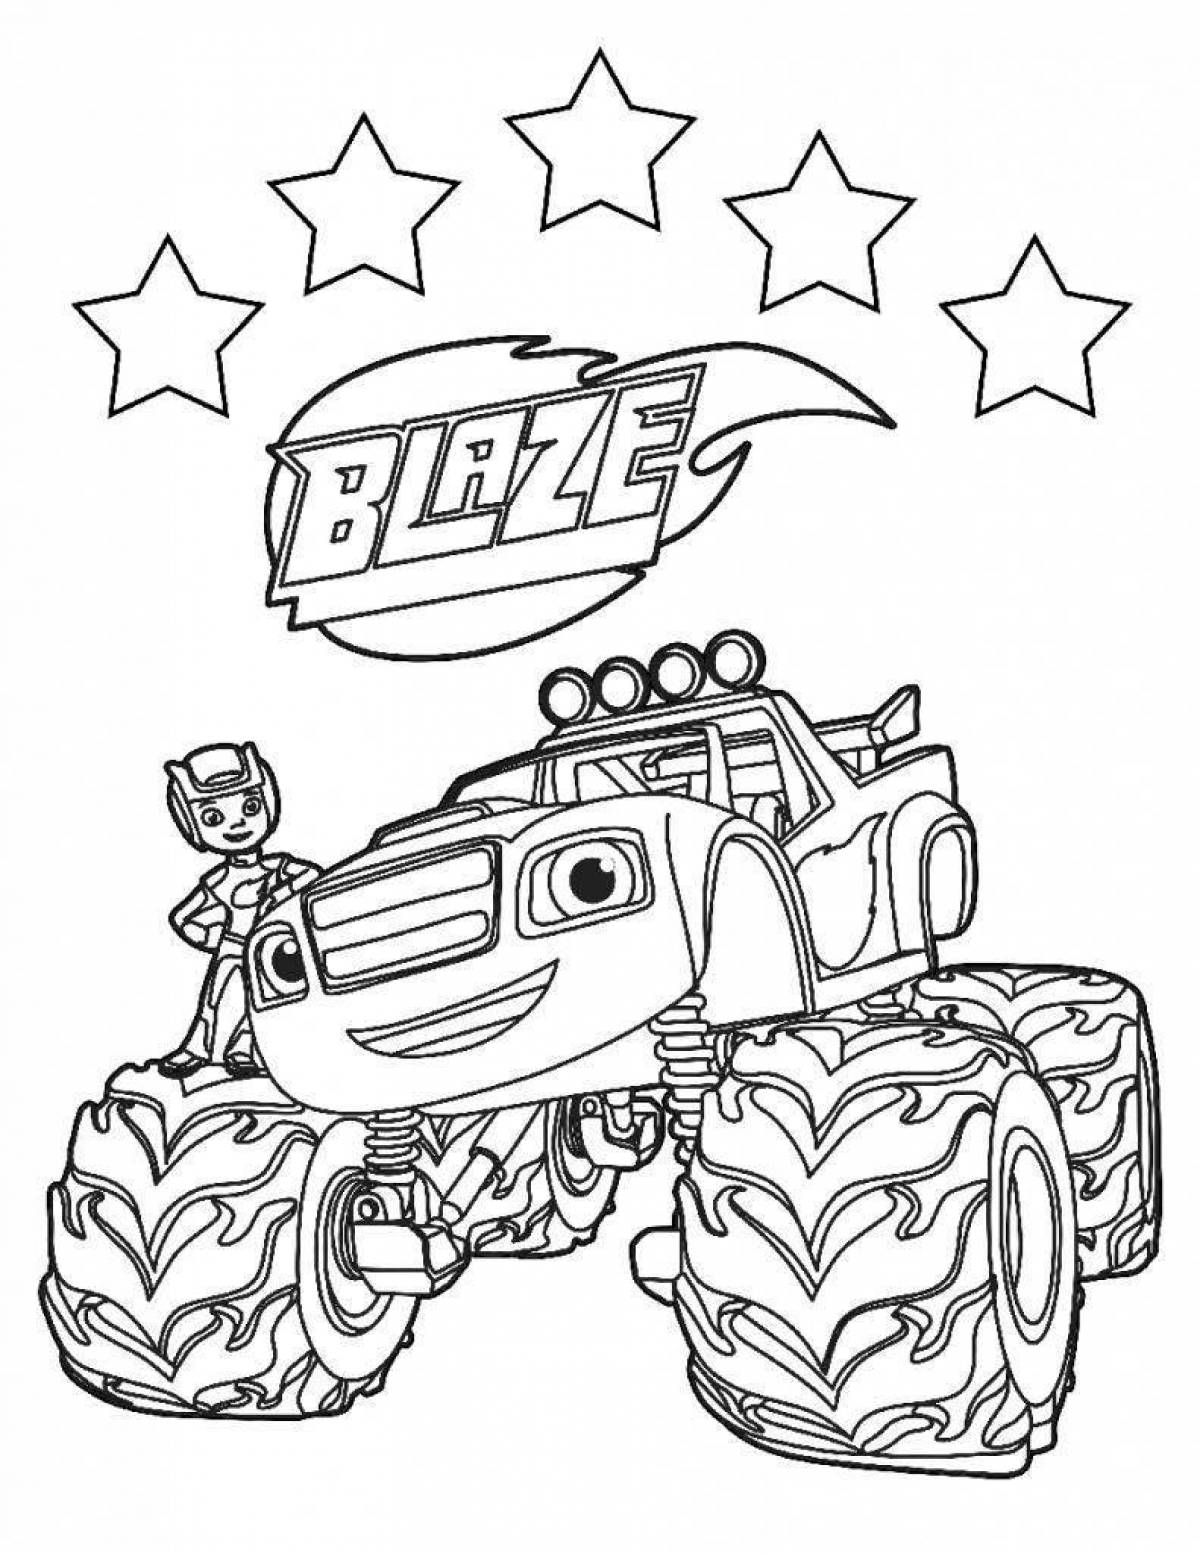 Fabulous wonder cars coloring page